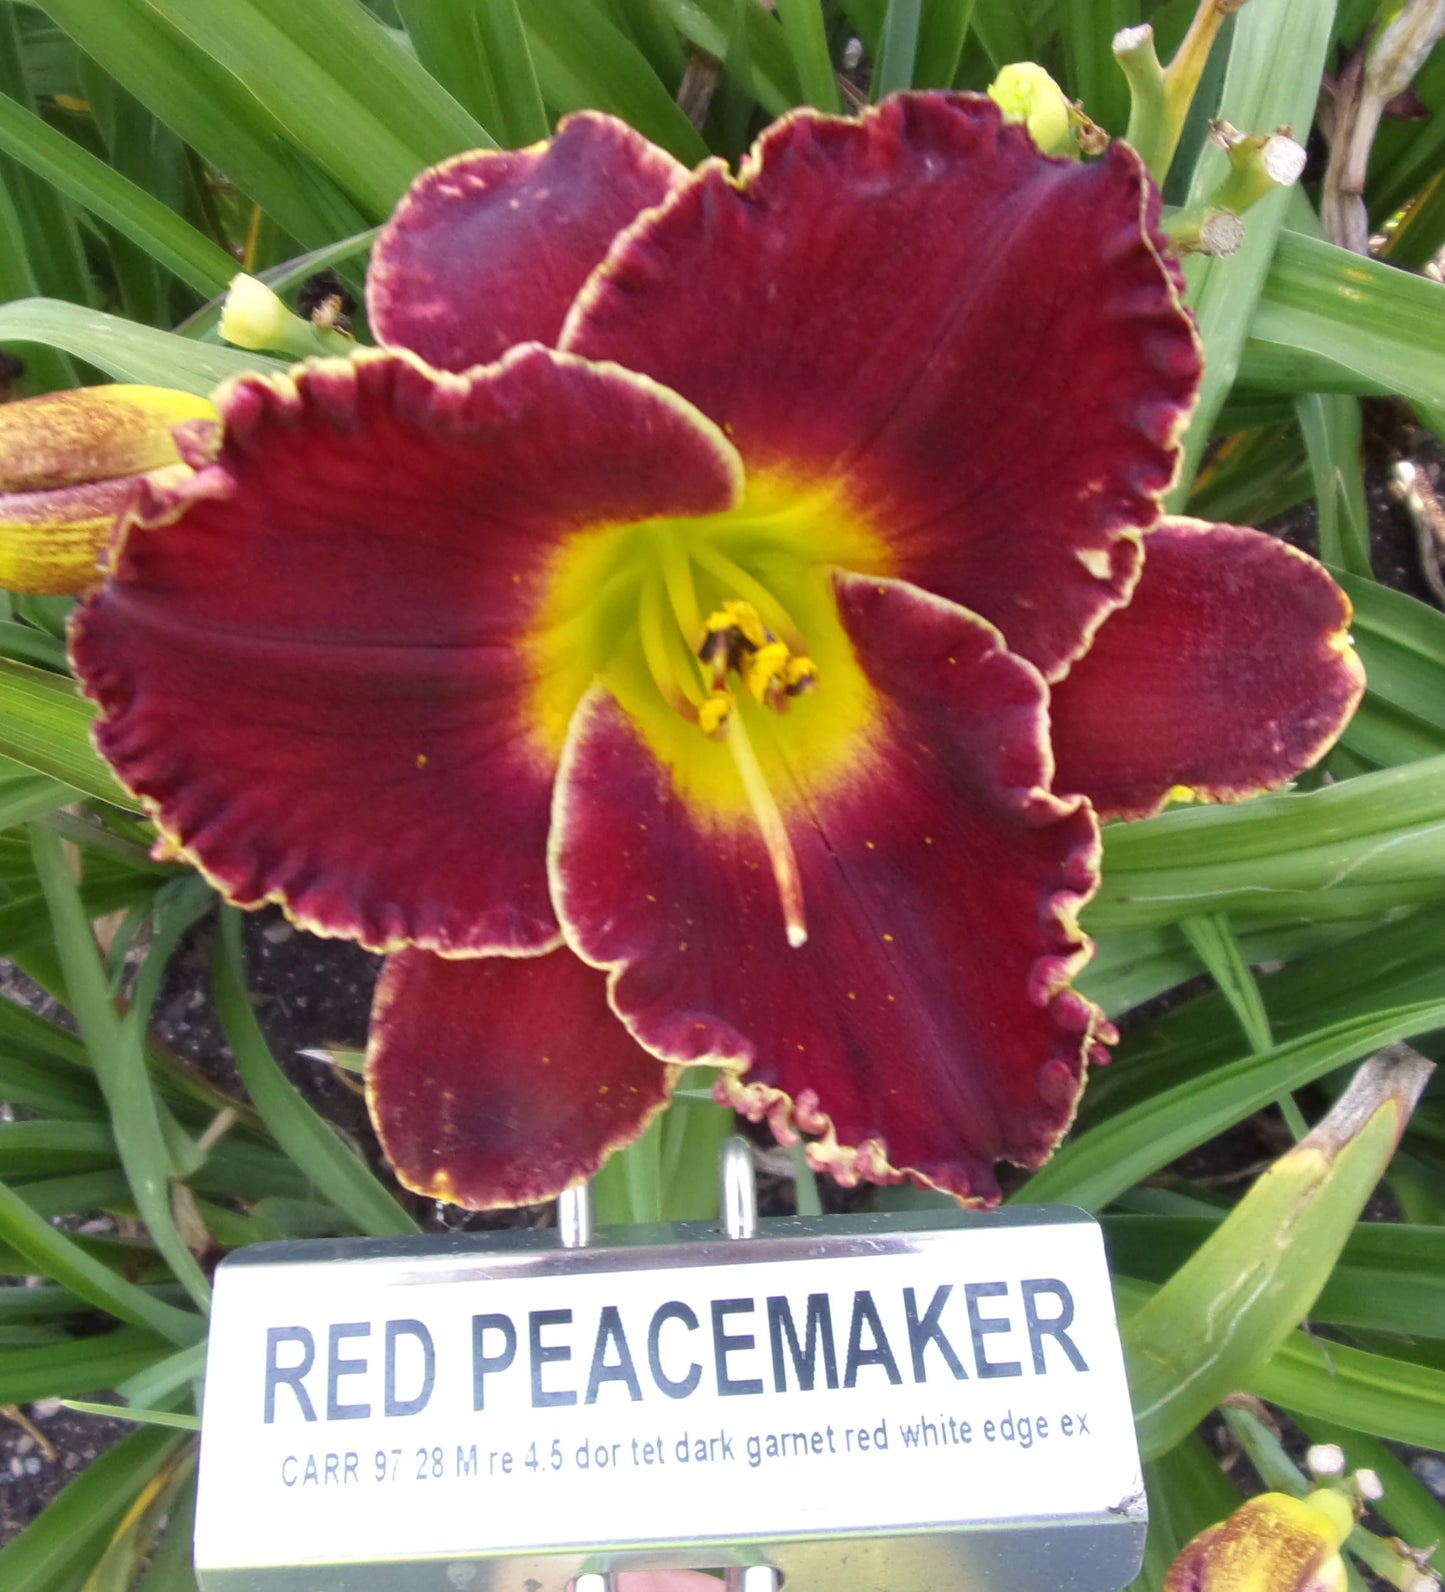 RED PEACEMAKER